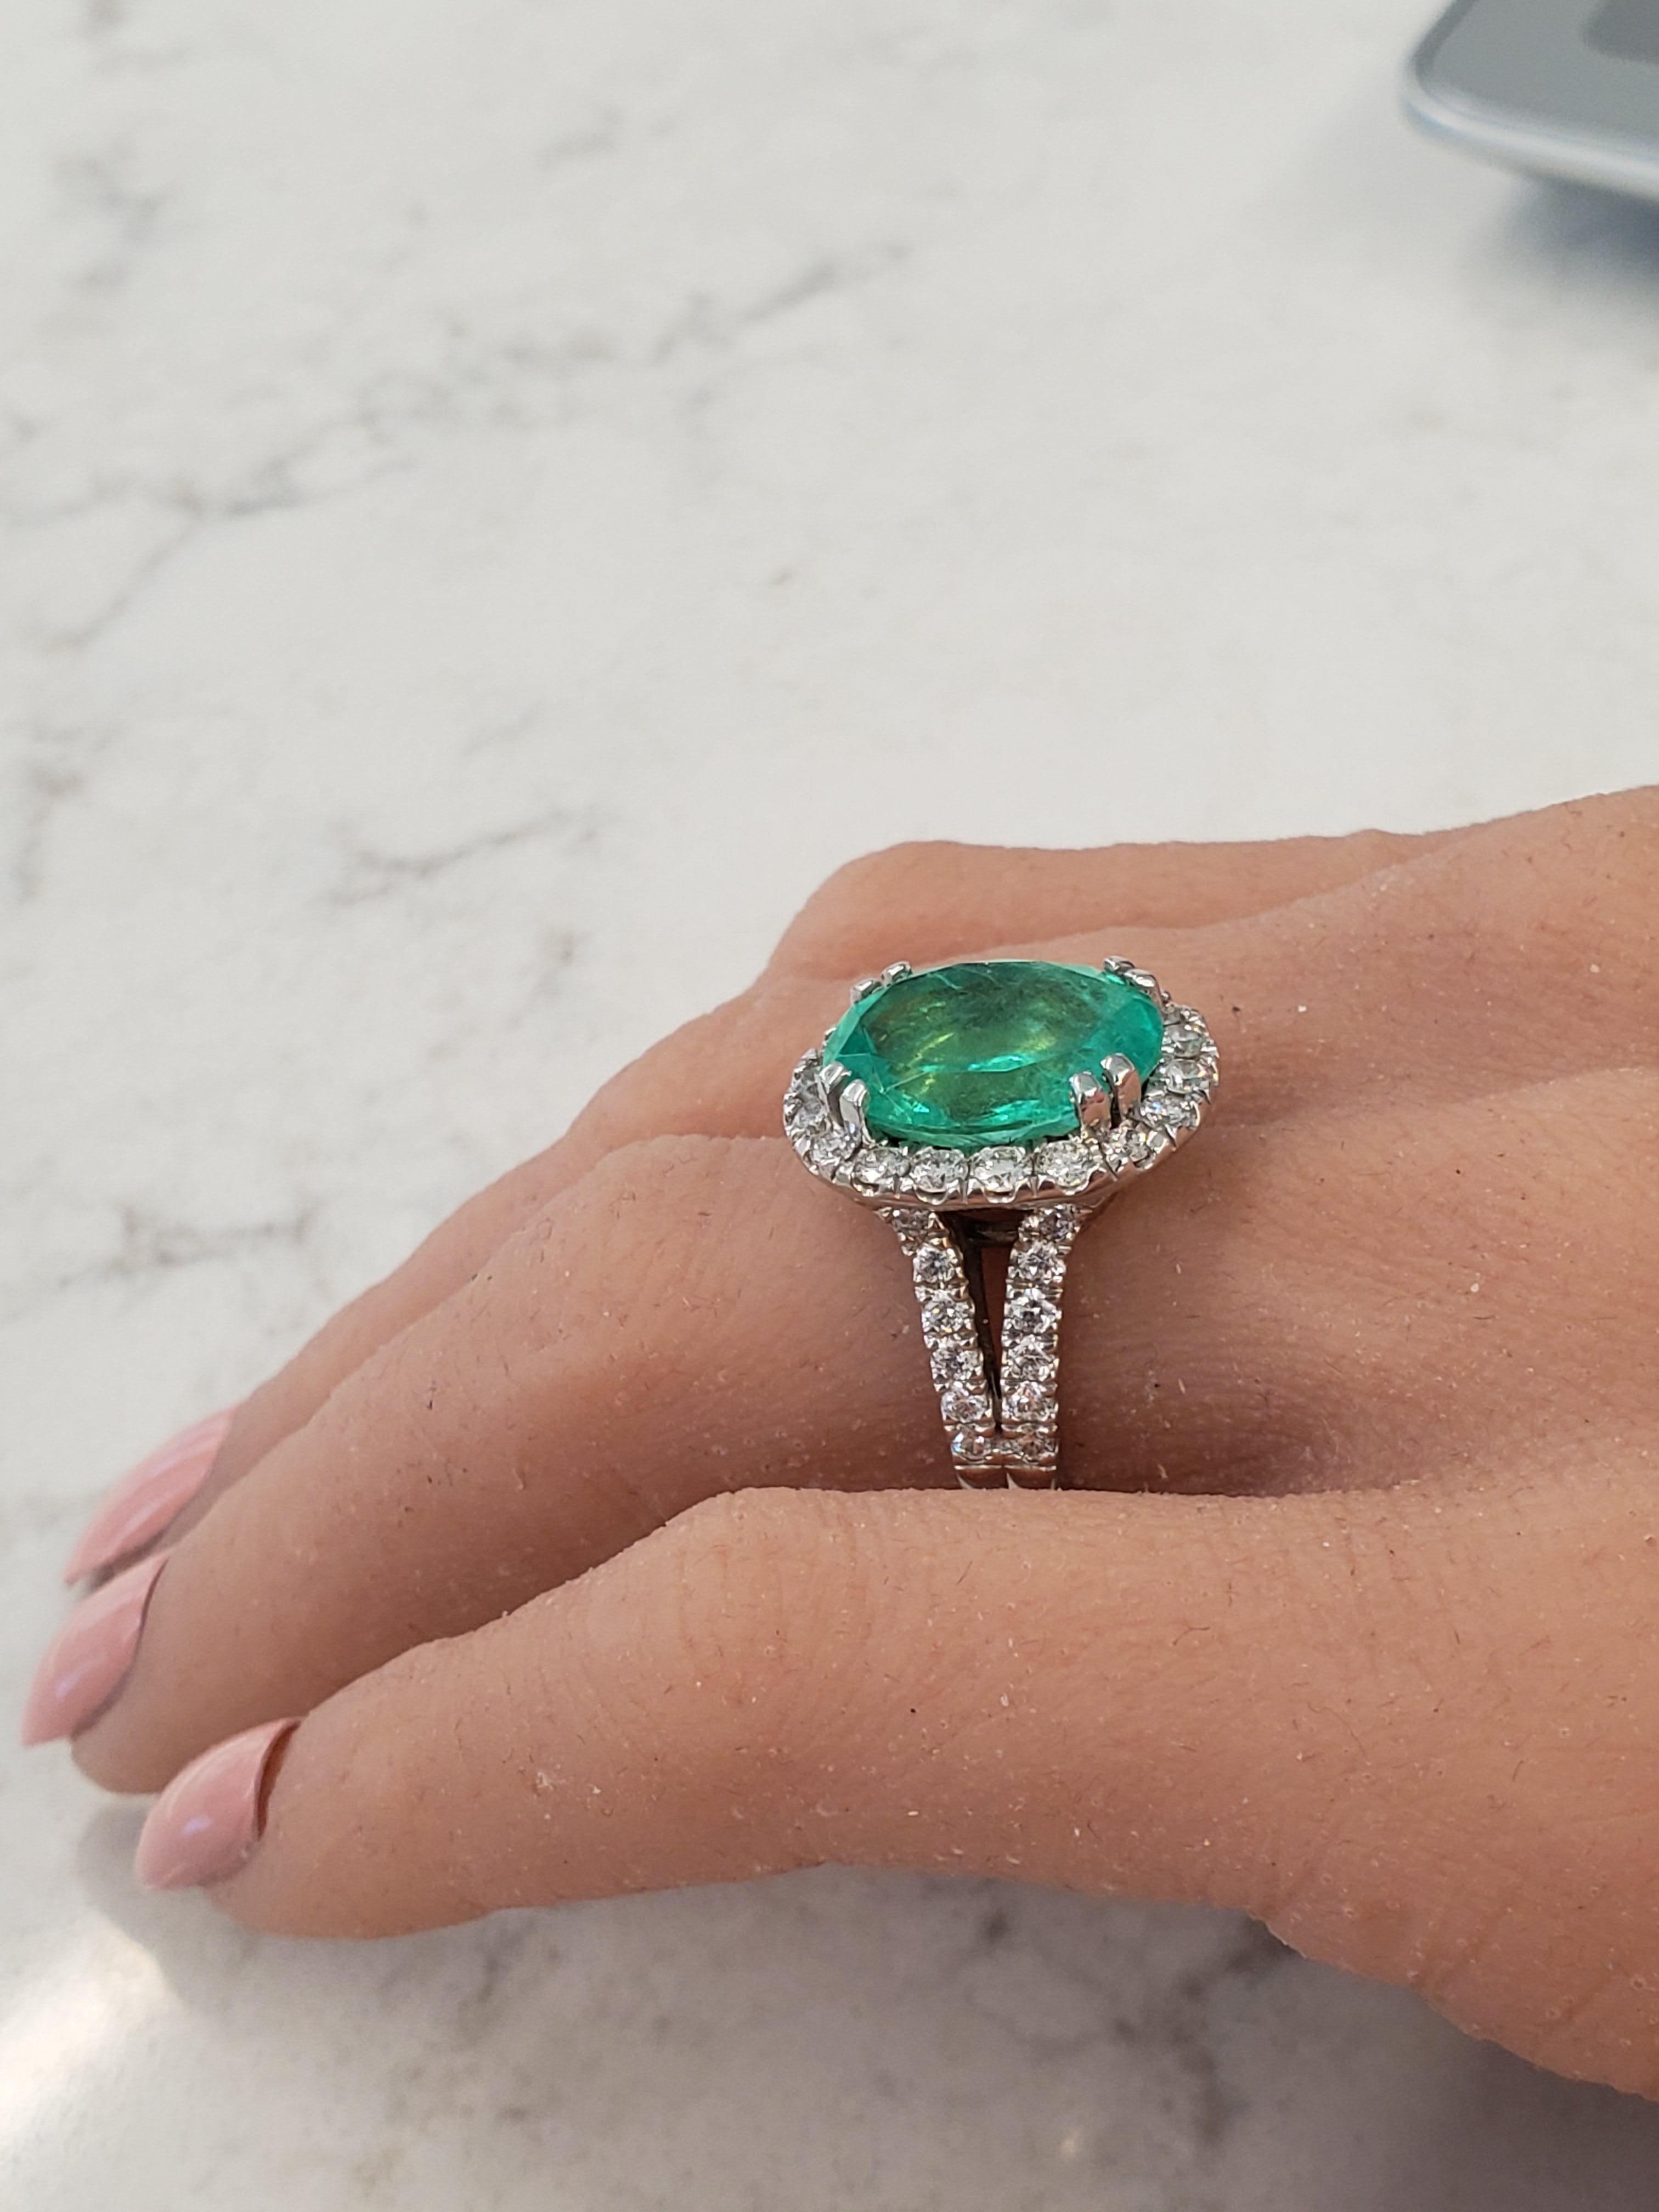 This is a 7.50 carat oval cut green emerald. It measures 15.00-12.22mm. The gem source is Brazil; its color is green combined with slight yellow undertones. A total of 42 scintillating round brilliant cut diamonds are prong set and arranged in a